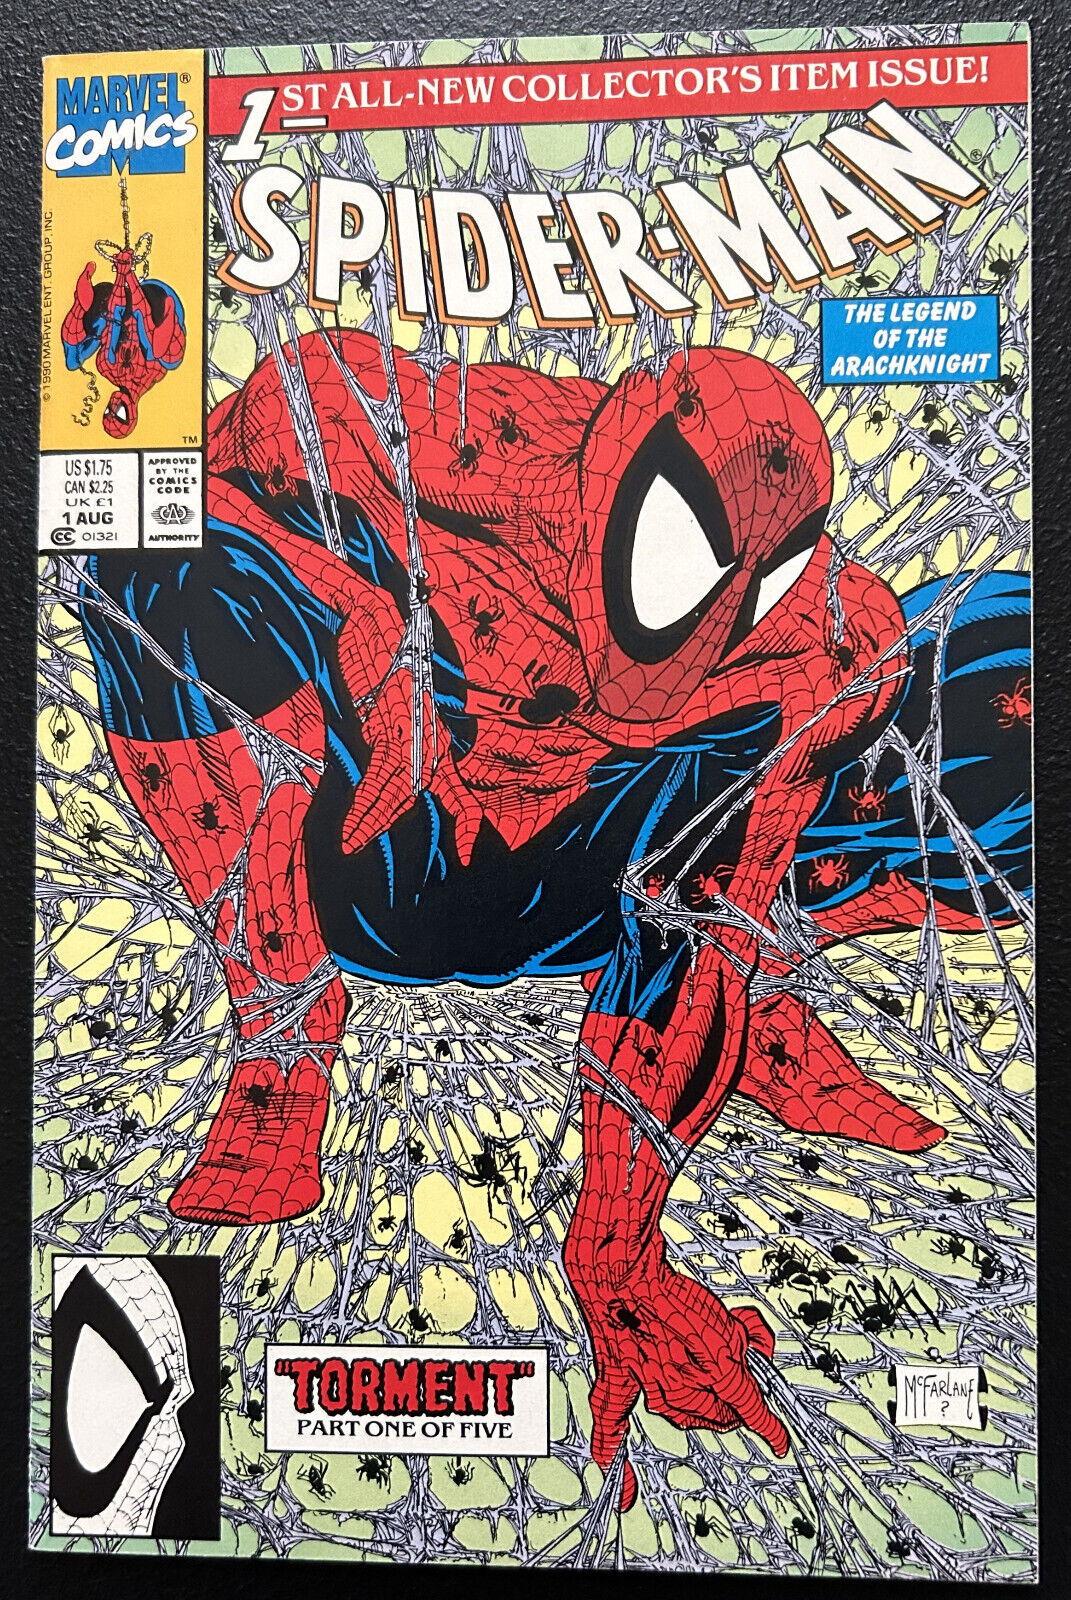 Spider-Man #1 Green Cover McFarlane Marvel, August 1990 Torment Part 1 Of 5